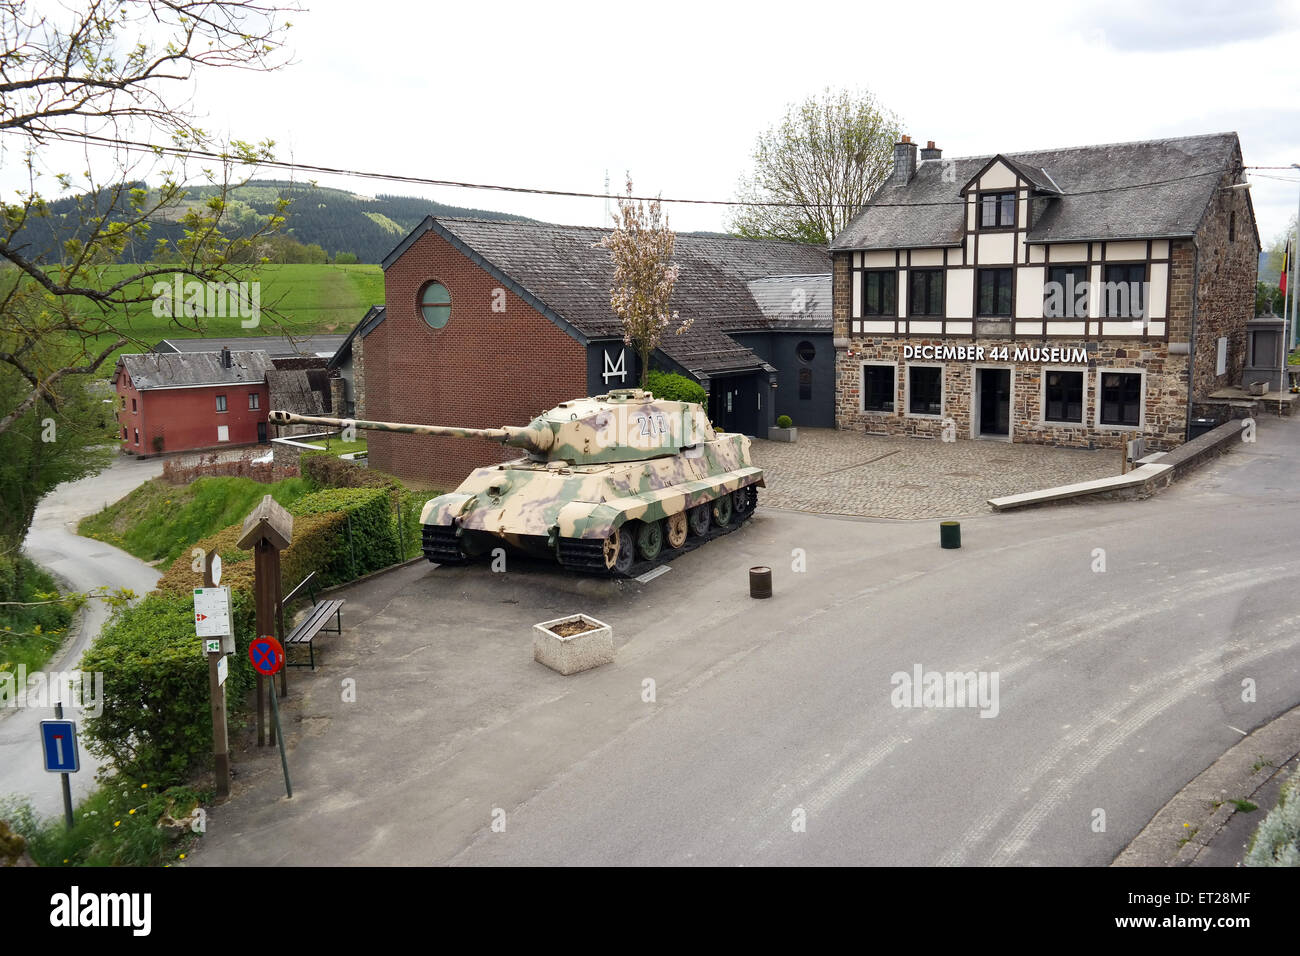 Tank in front of December 44 museum in La Gleize, Reminder of wwII Battle of the Bulge. Stock Photo